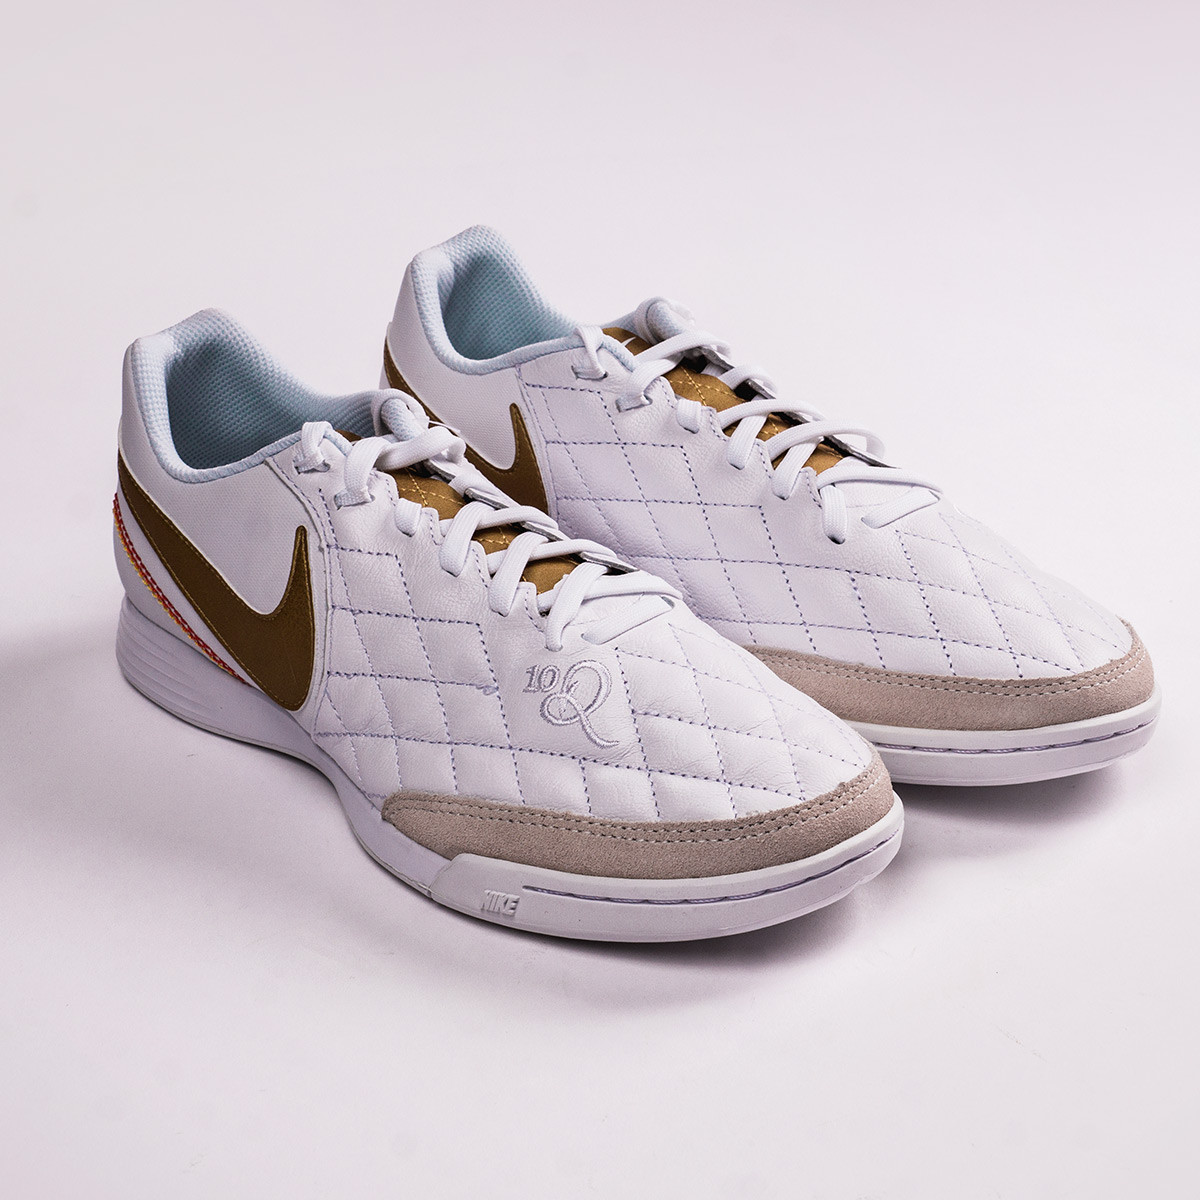 Nike City Collection 2 - Blogs Fútbol Emotion